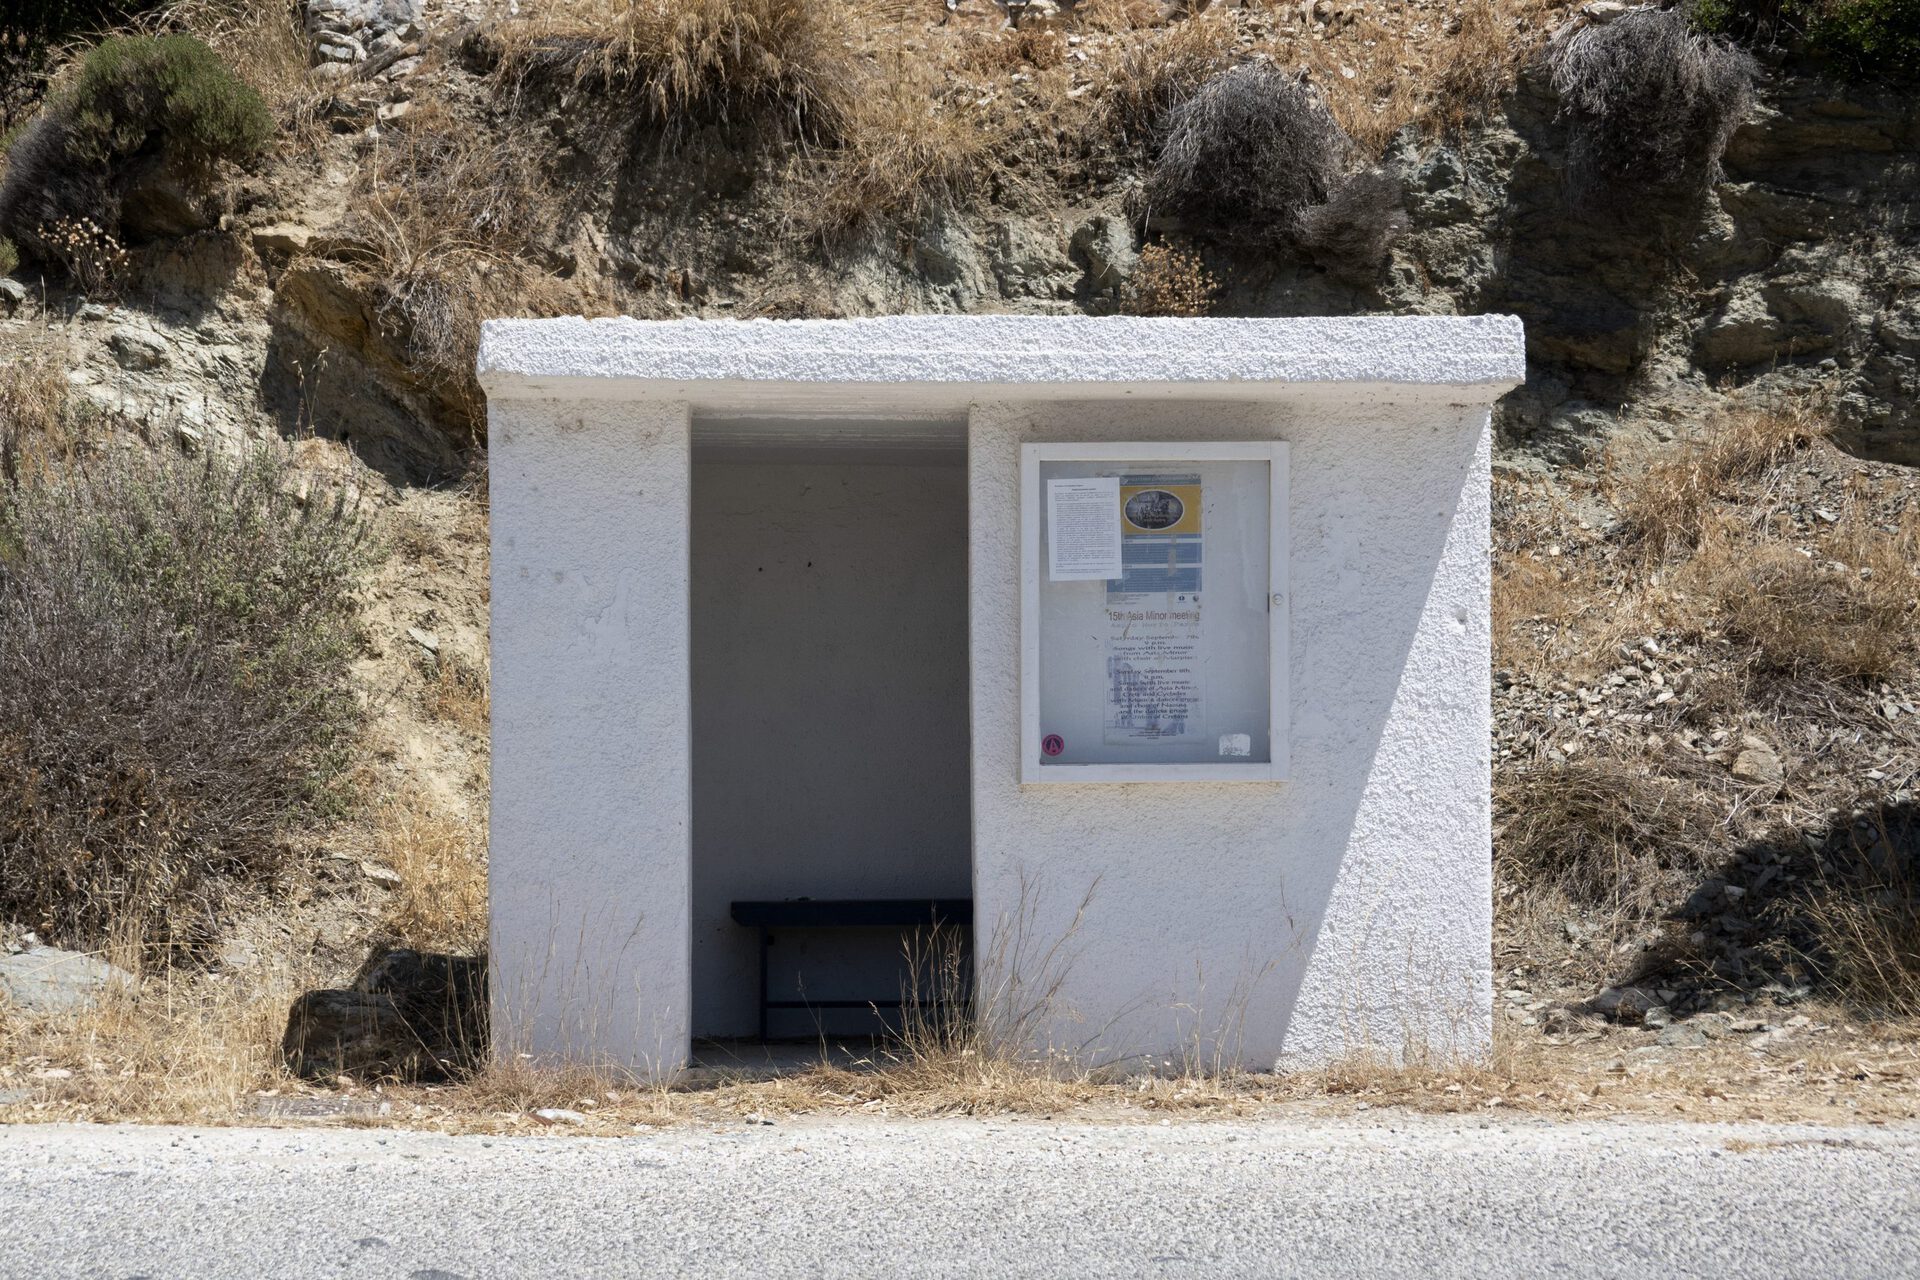 Ishai Shapira Kalter, "First Stop: Aspro Chorio", 2021. Installation view. After "Paradise Point", from the spectacular viewpoints in Paros and after driving on a small bridge, on the way to the village of Aspro Chorio at an embossed bus stop which resembles a tiny solitary confinement cell with blue mailboxes and old magazines scattered on a bench, you will find a single crate / painting.